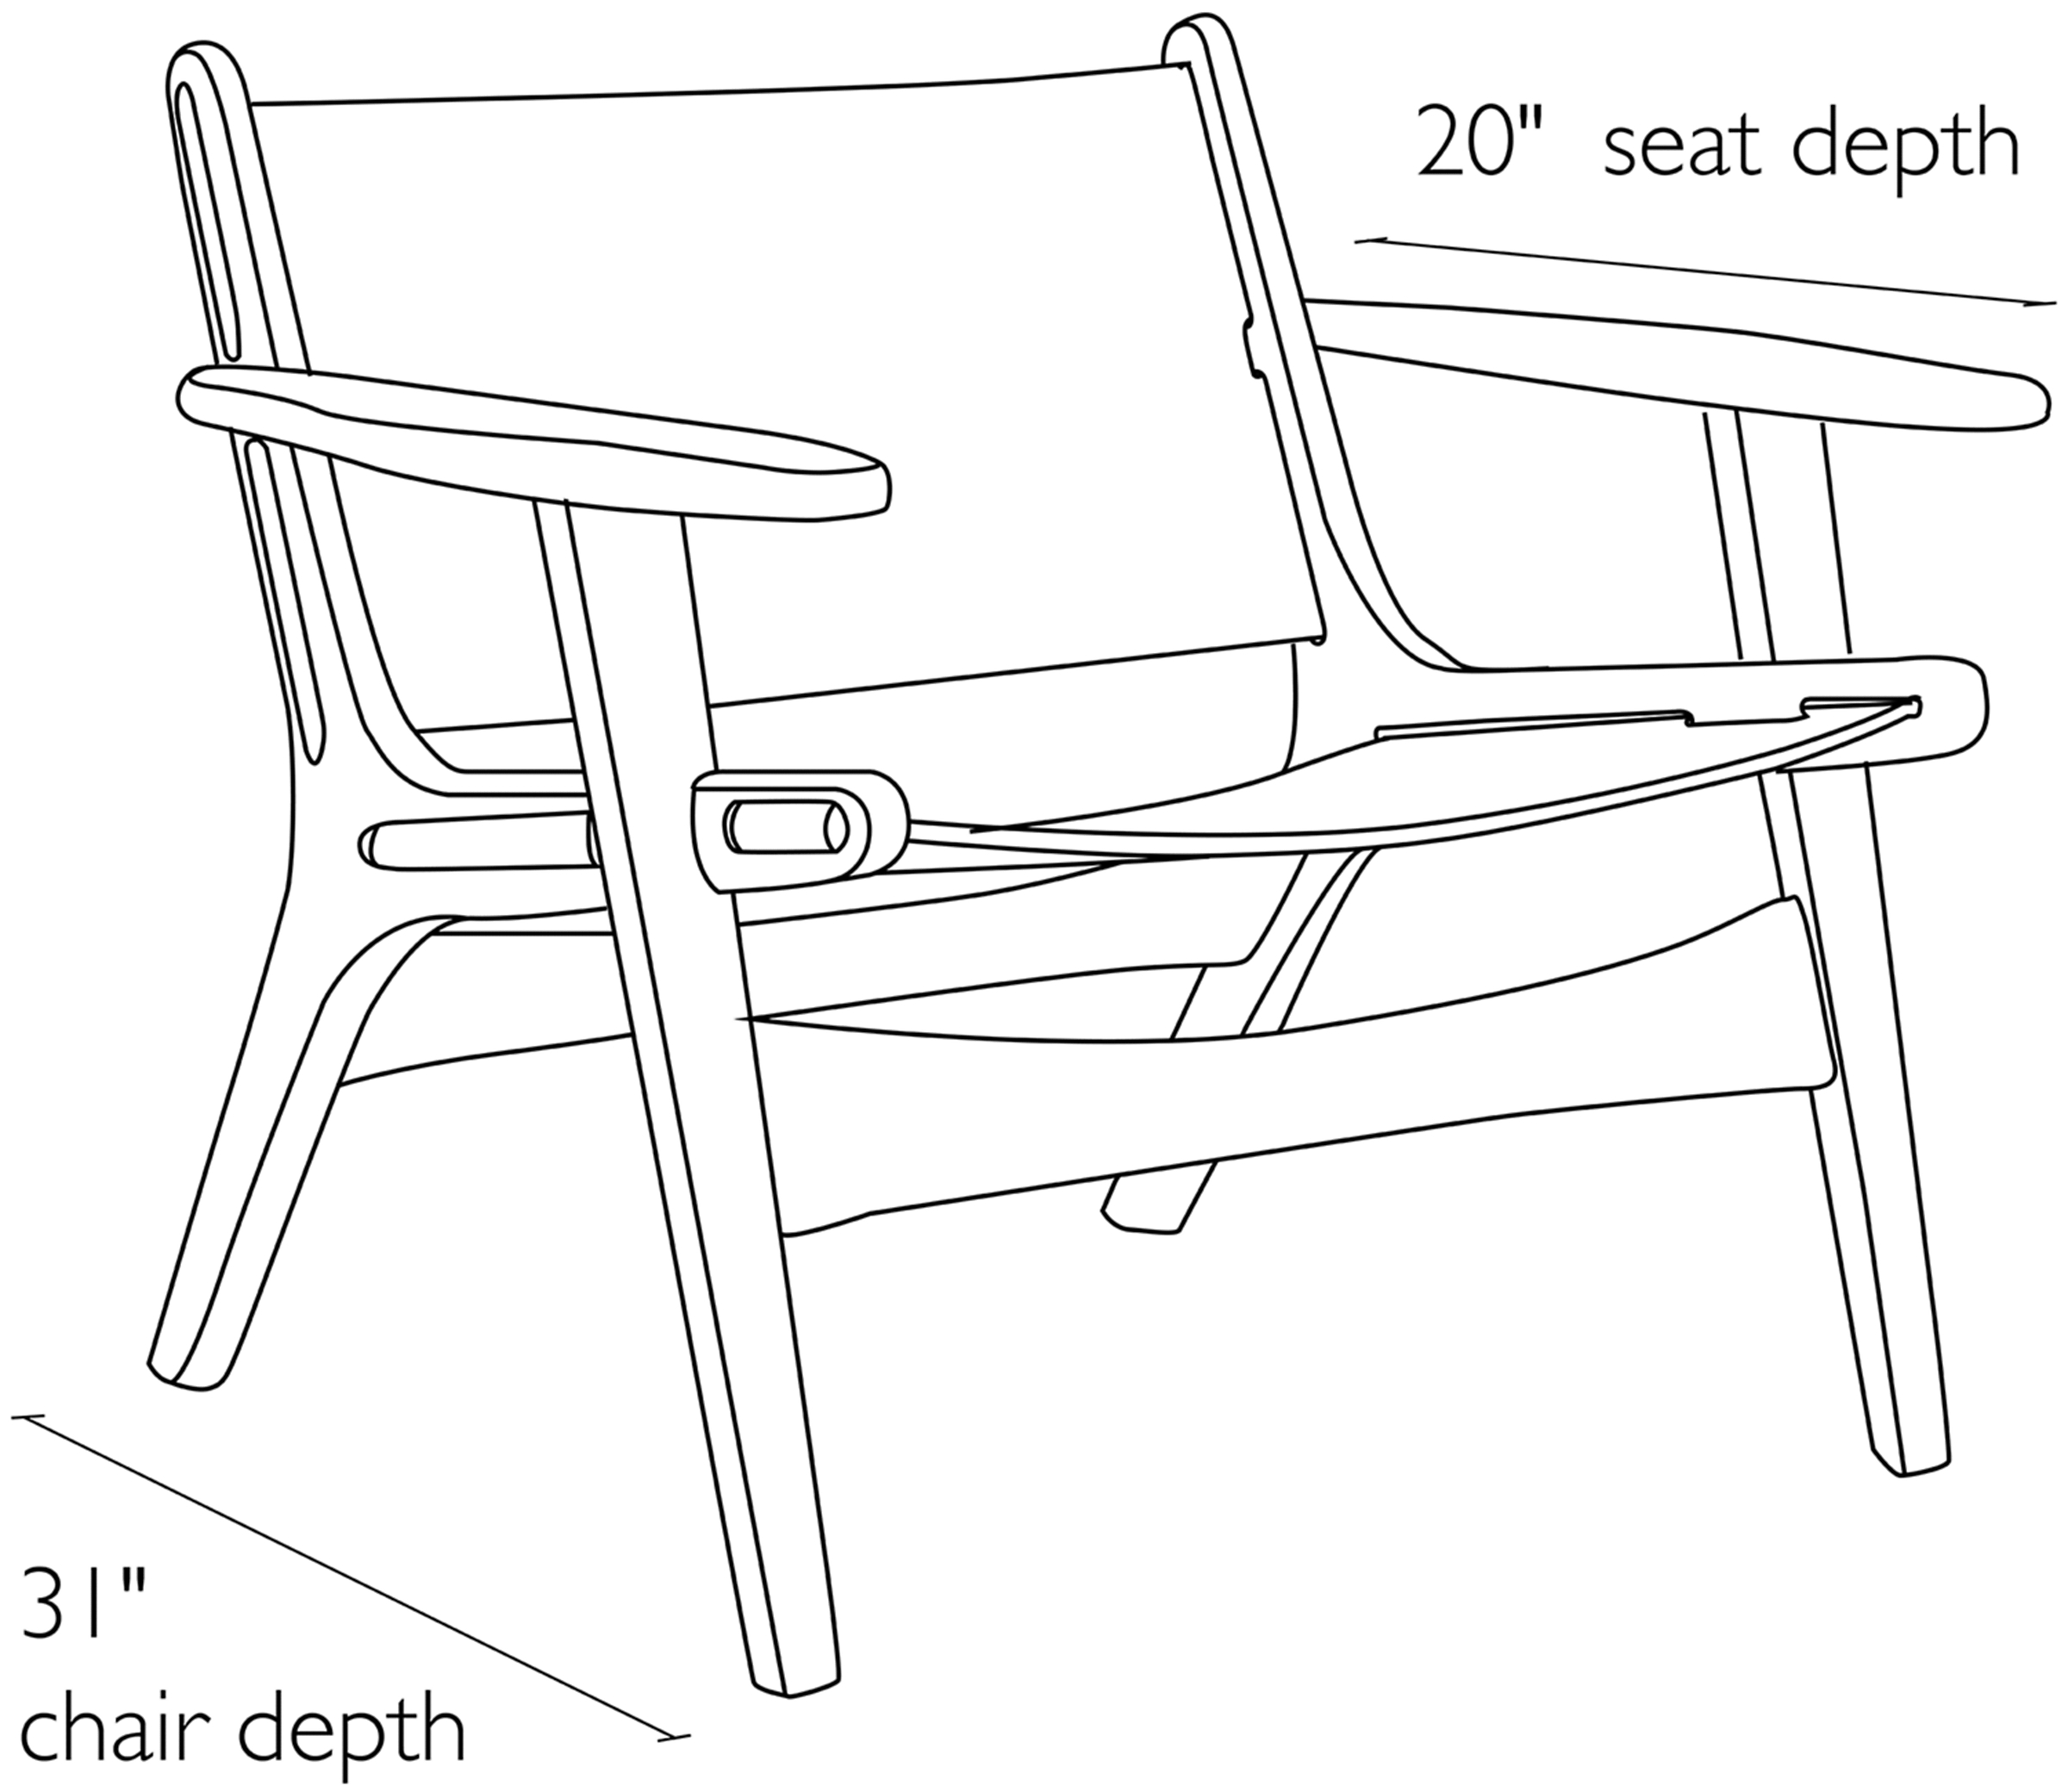 Side view dimension illustration of Lars chair.